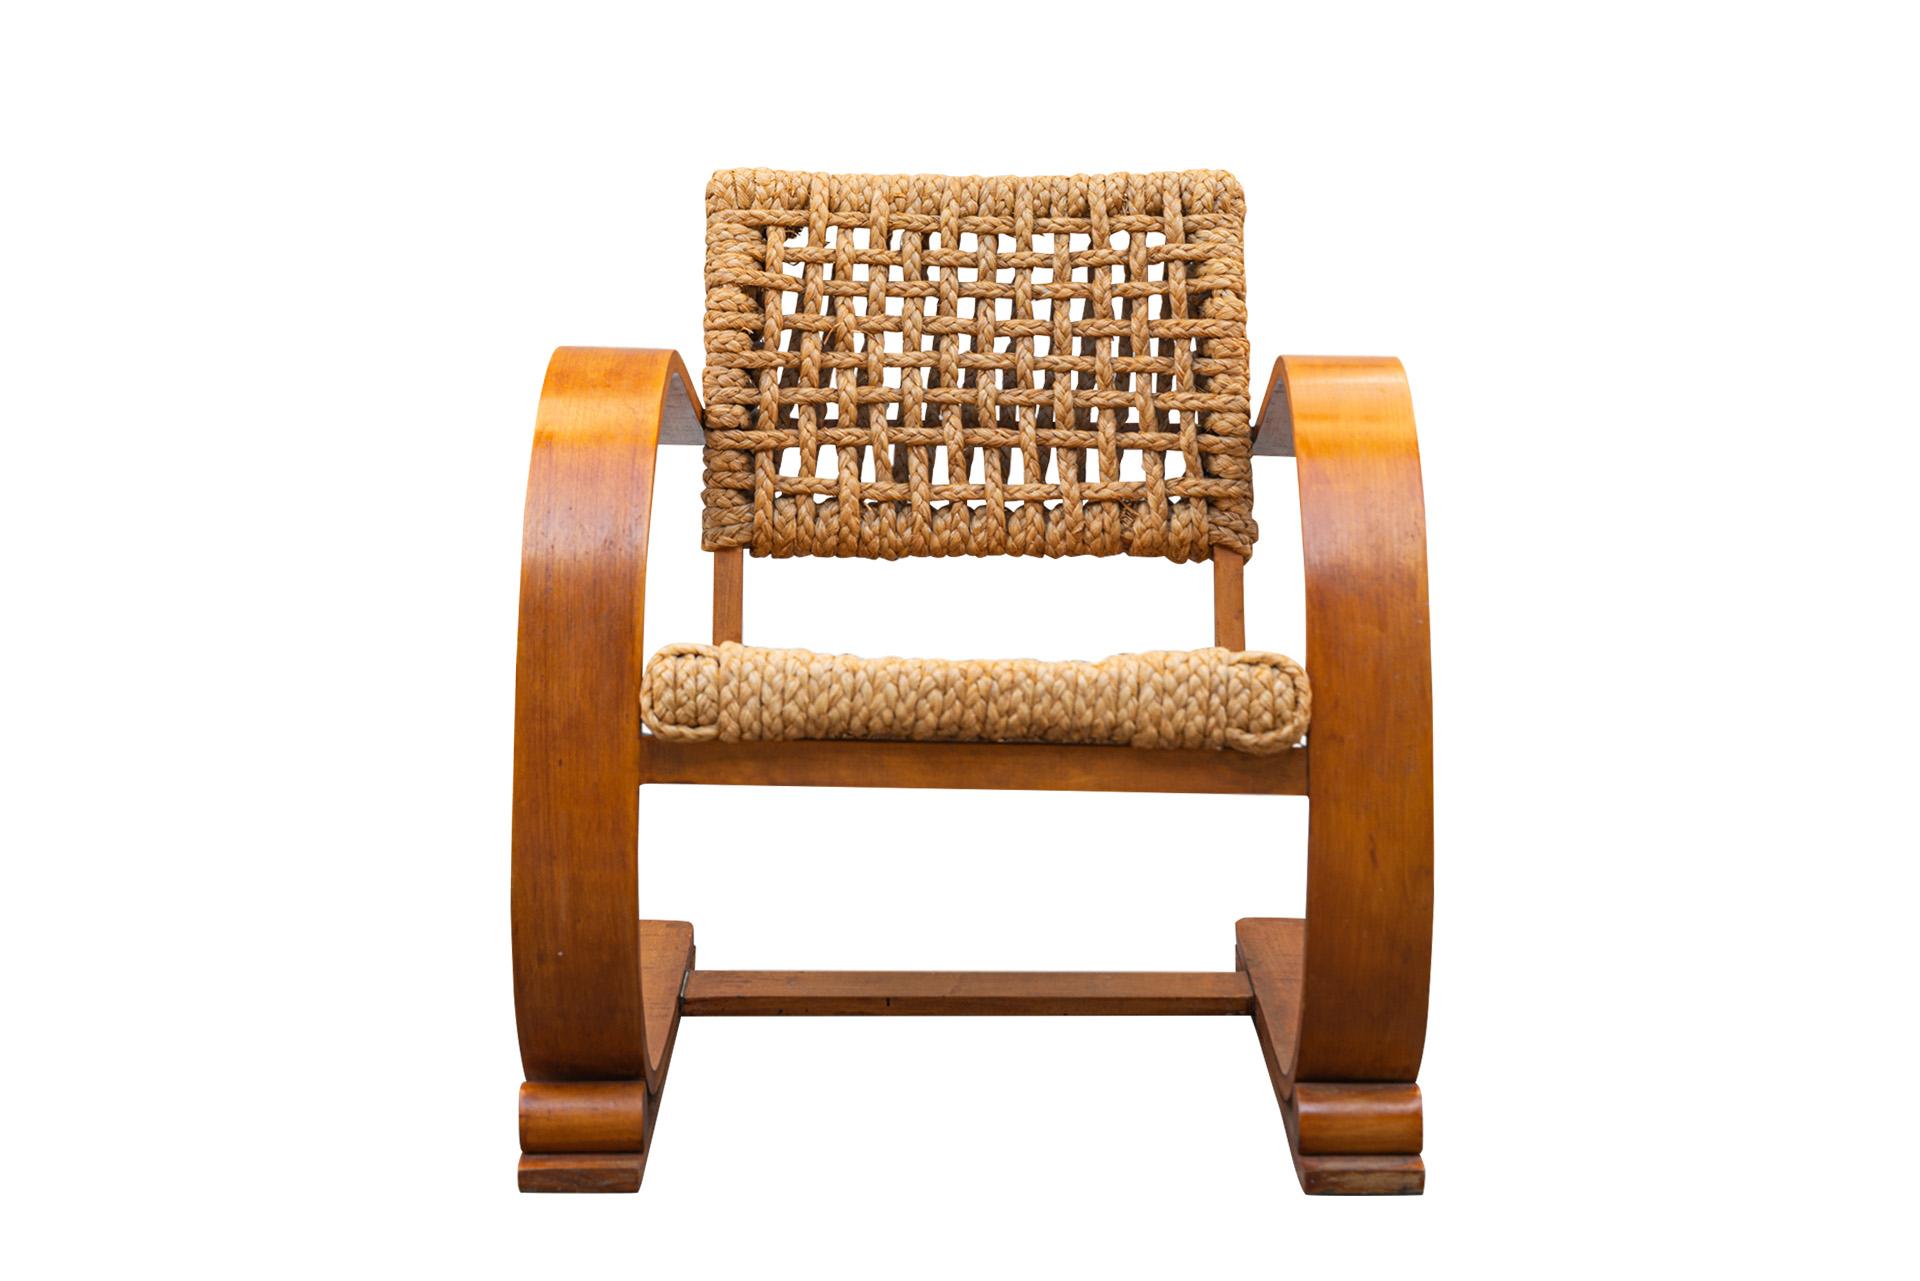 Adrien Audoux and Frida Minet, Pair of armchairs,
For Vibo-Vesoul,
Wood frame and braided rope, 
circa 1940, France. 

Measures : Width 64 cm, Depth 70 cm, Height 69 cm, Seat Height 40 cm. 

Adrien Audoux and Frida Minet are a couple of